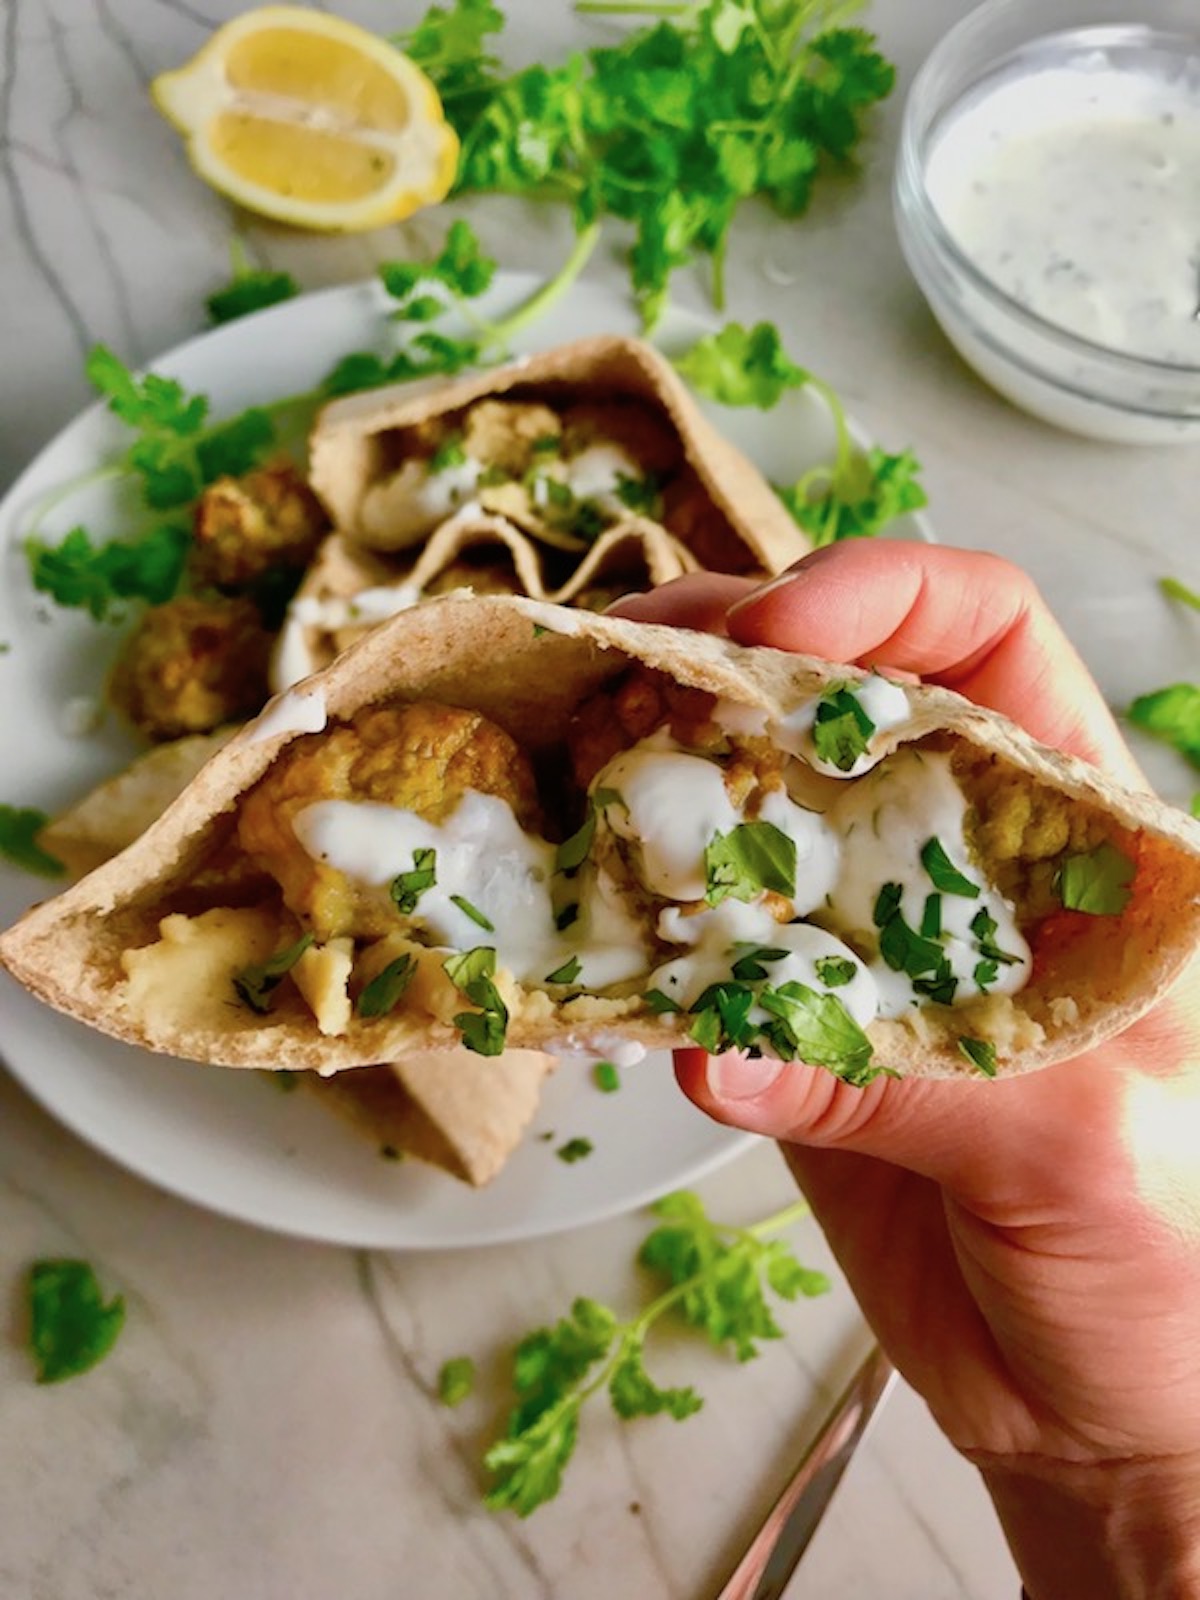 Hand holding Moroccan Pita Bread Sandwiches Recipe on a plate. They are filled with homemade hummus, moist turkey meatballs made with warm Moroccan spices like ginger, turmeric, and coriander, and then topped with creamy, fresh and bright lemon yogurt sauce.